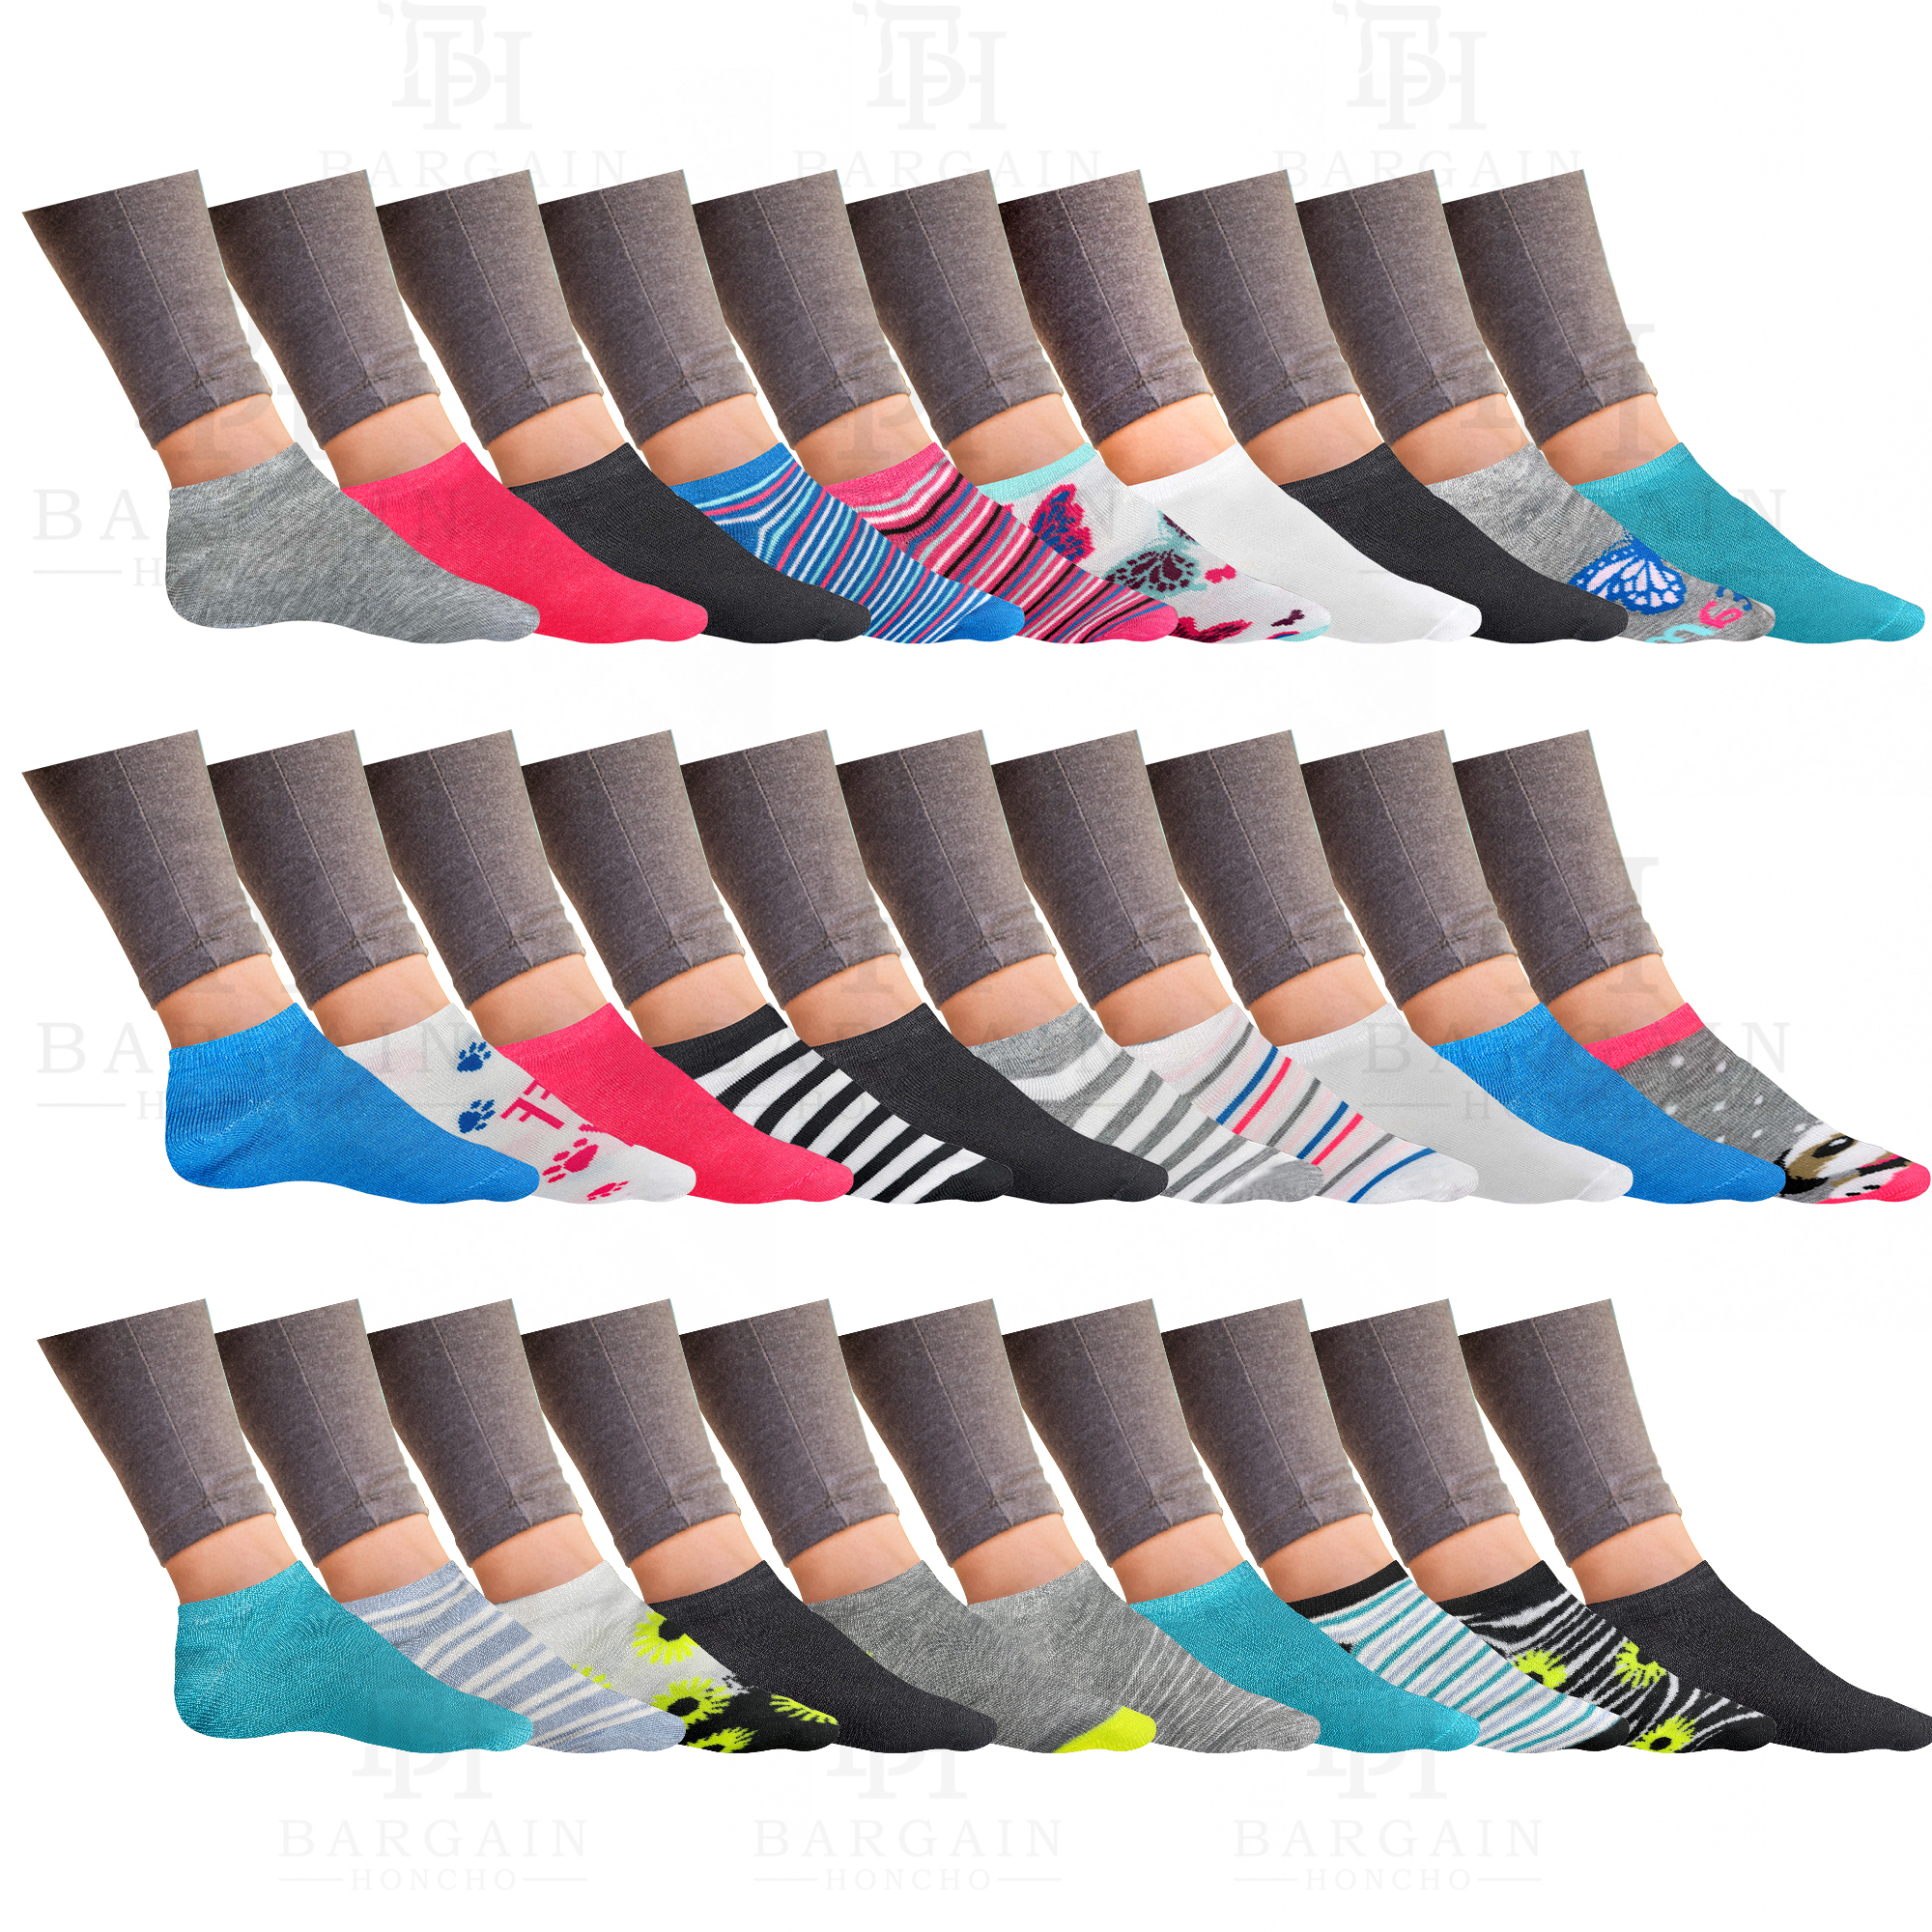 10-Pair: Women’s Breathable Fun Funky Comfortable Colorful No Show Low Cut Ankle Socks - 20-Pairs